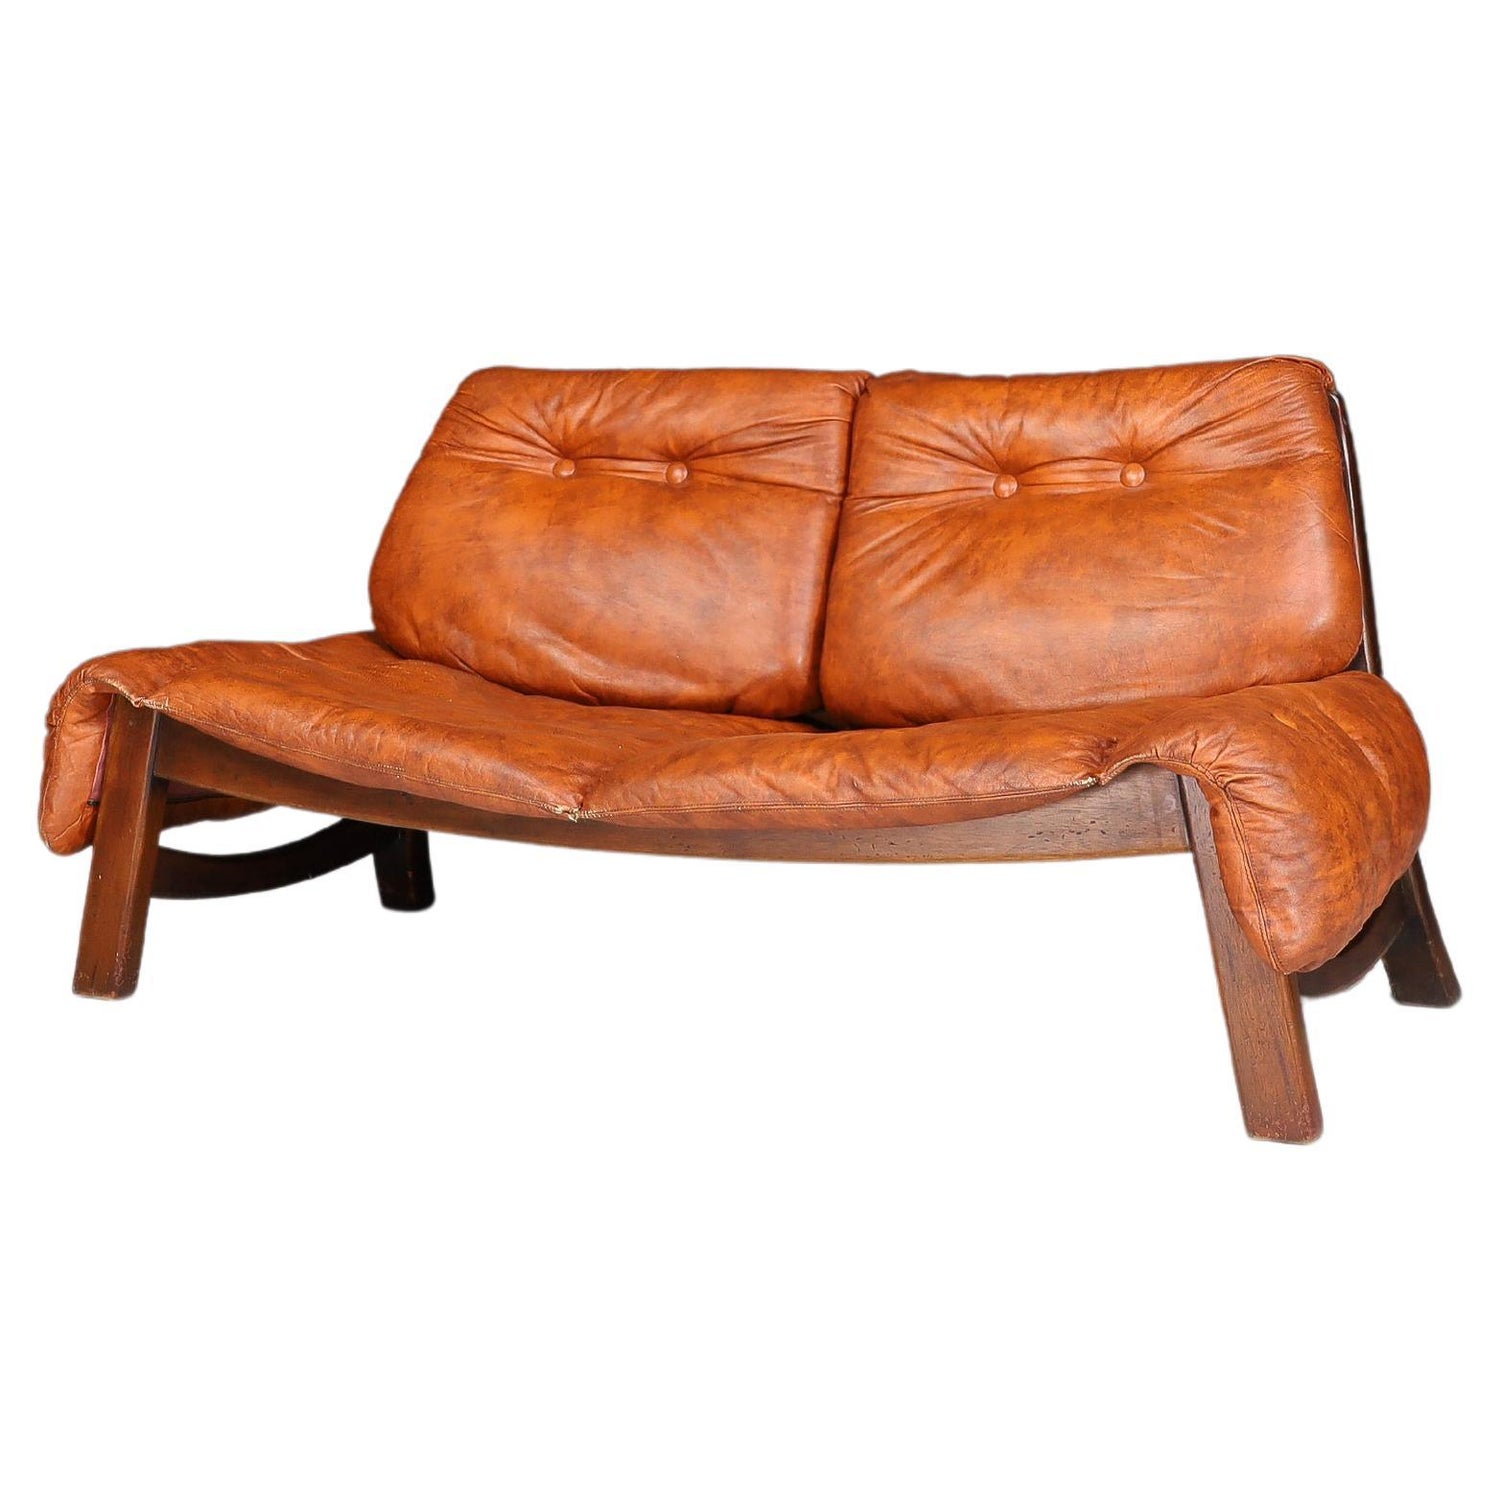 Beliebte Klassiker Lounge Sofa in by 1stDibs Bighinello George Leather Italy, Eurosalotto, at Sale 1970s Cognac For for